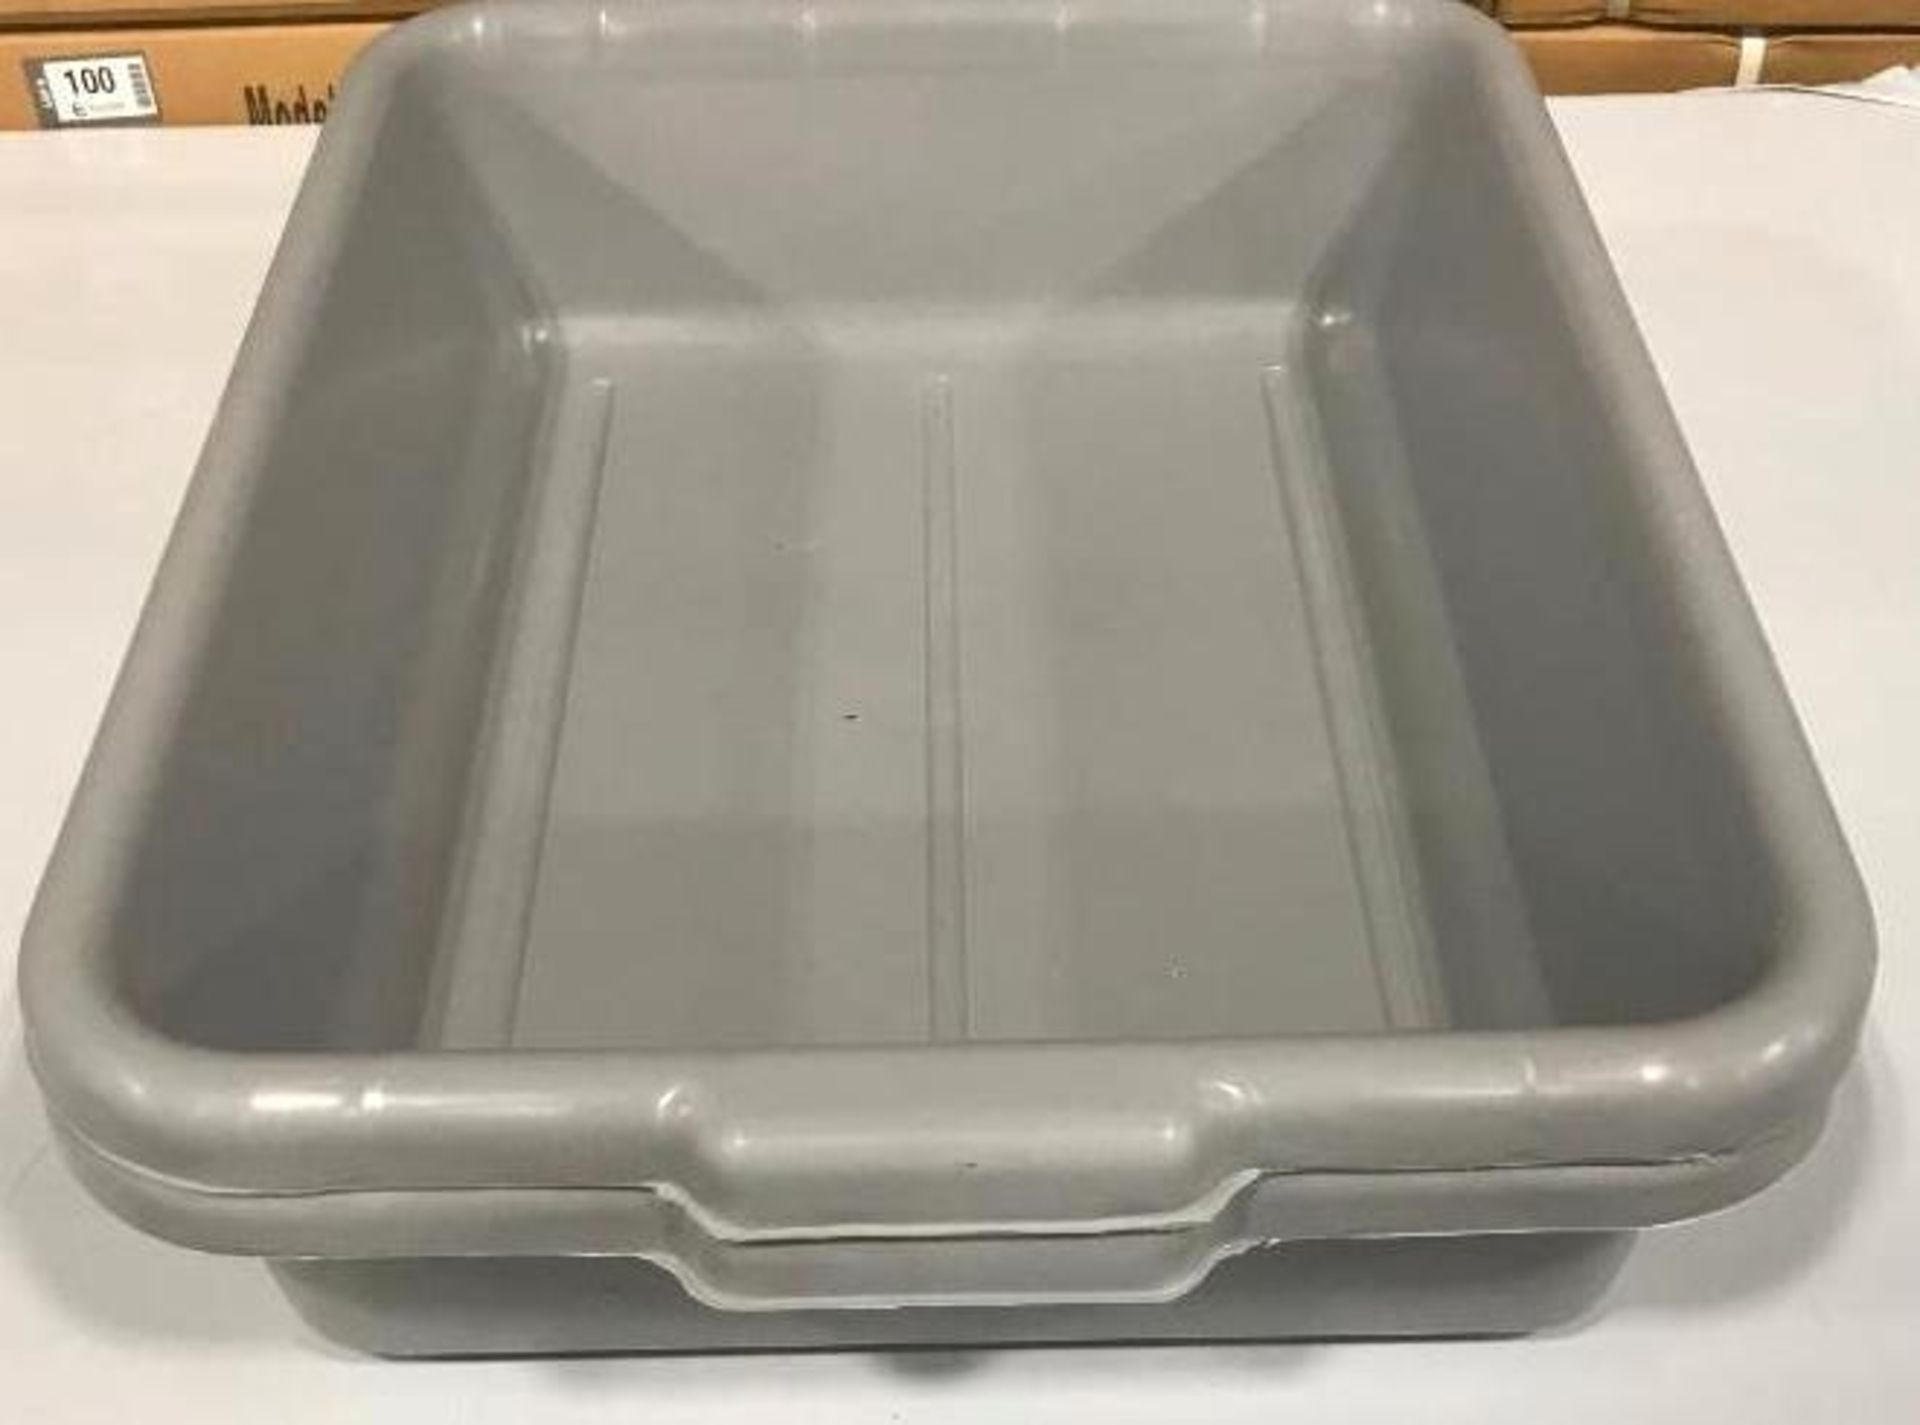 22" X 15.75" X 5.25" HEAVY DUTY GREY POLY TOTES, JR 36500 - LOT OF 2 - NEW - Image 2 of 2